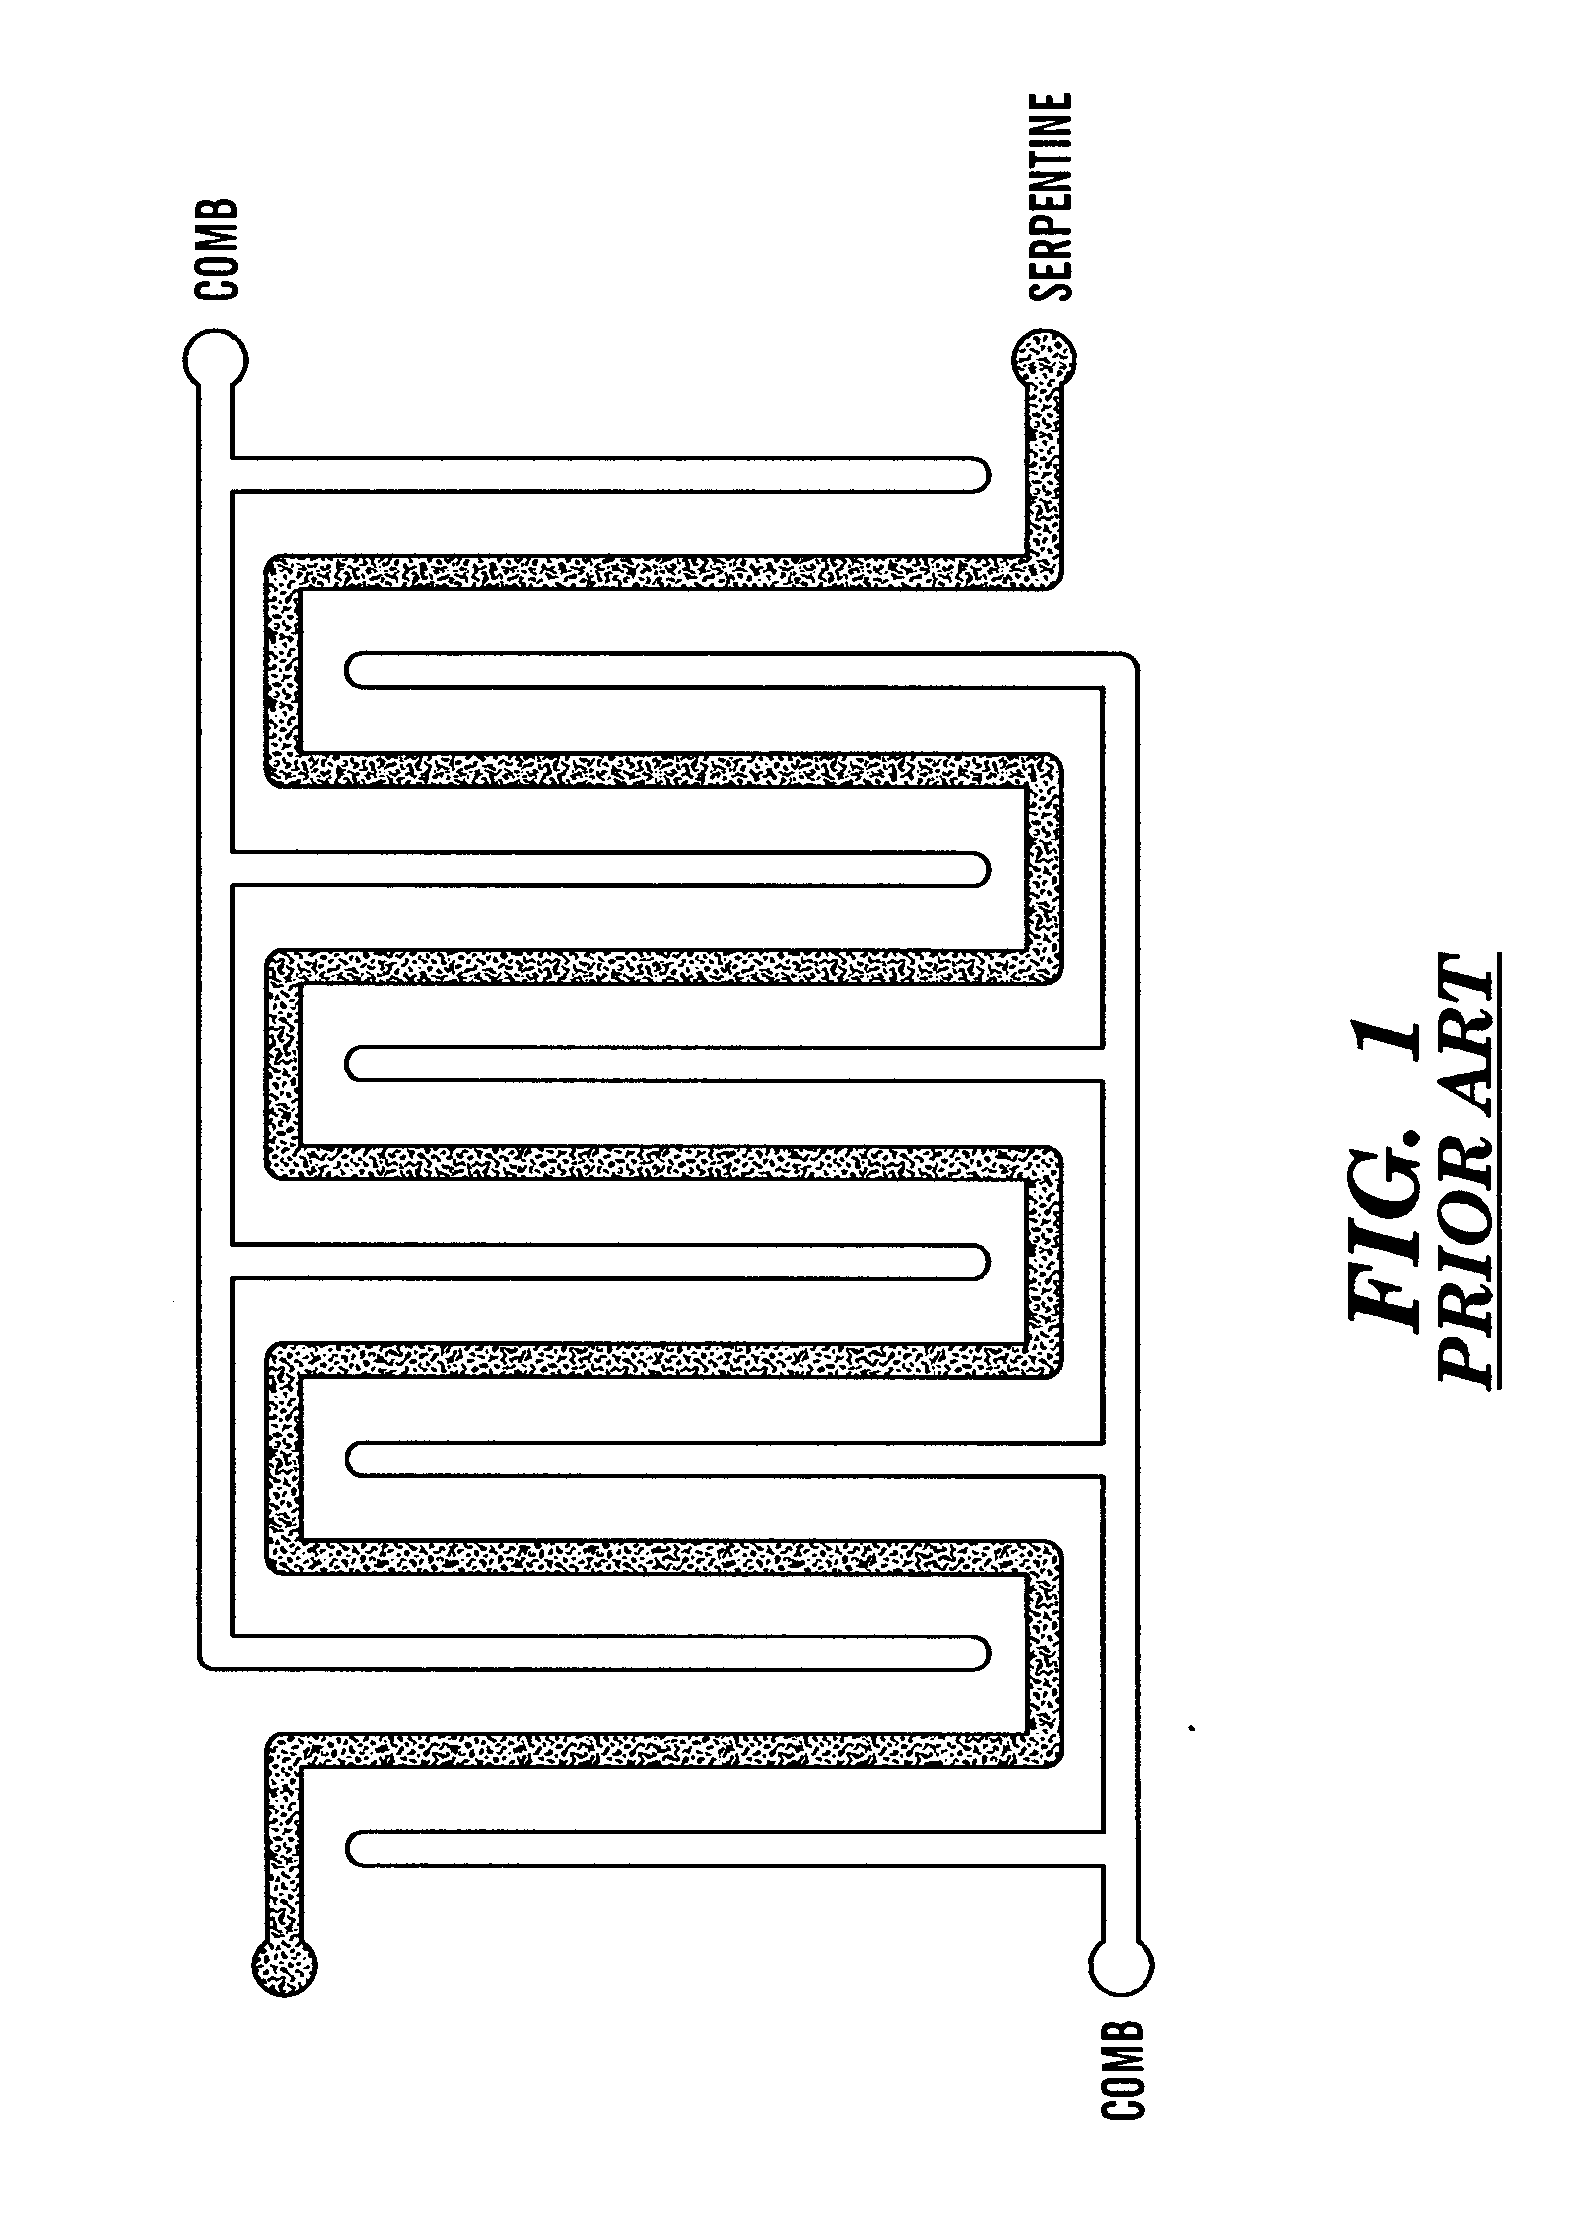 Method for prediction of premature dielectric breakdown in a semiconductor